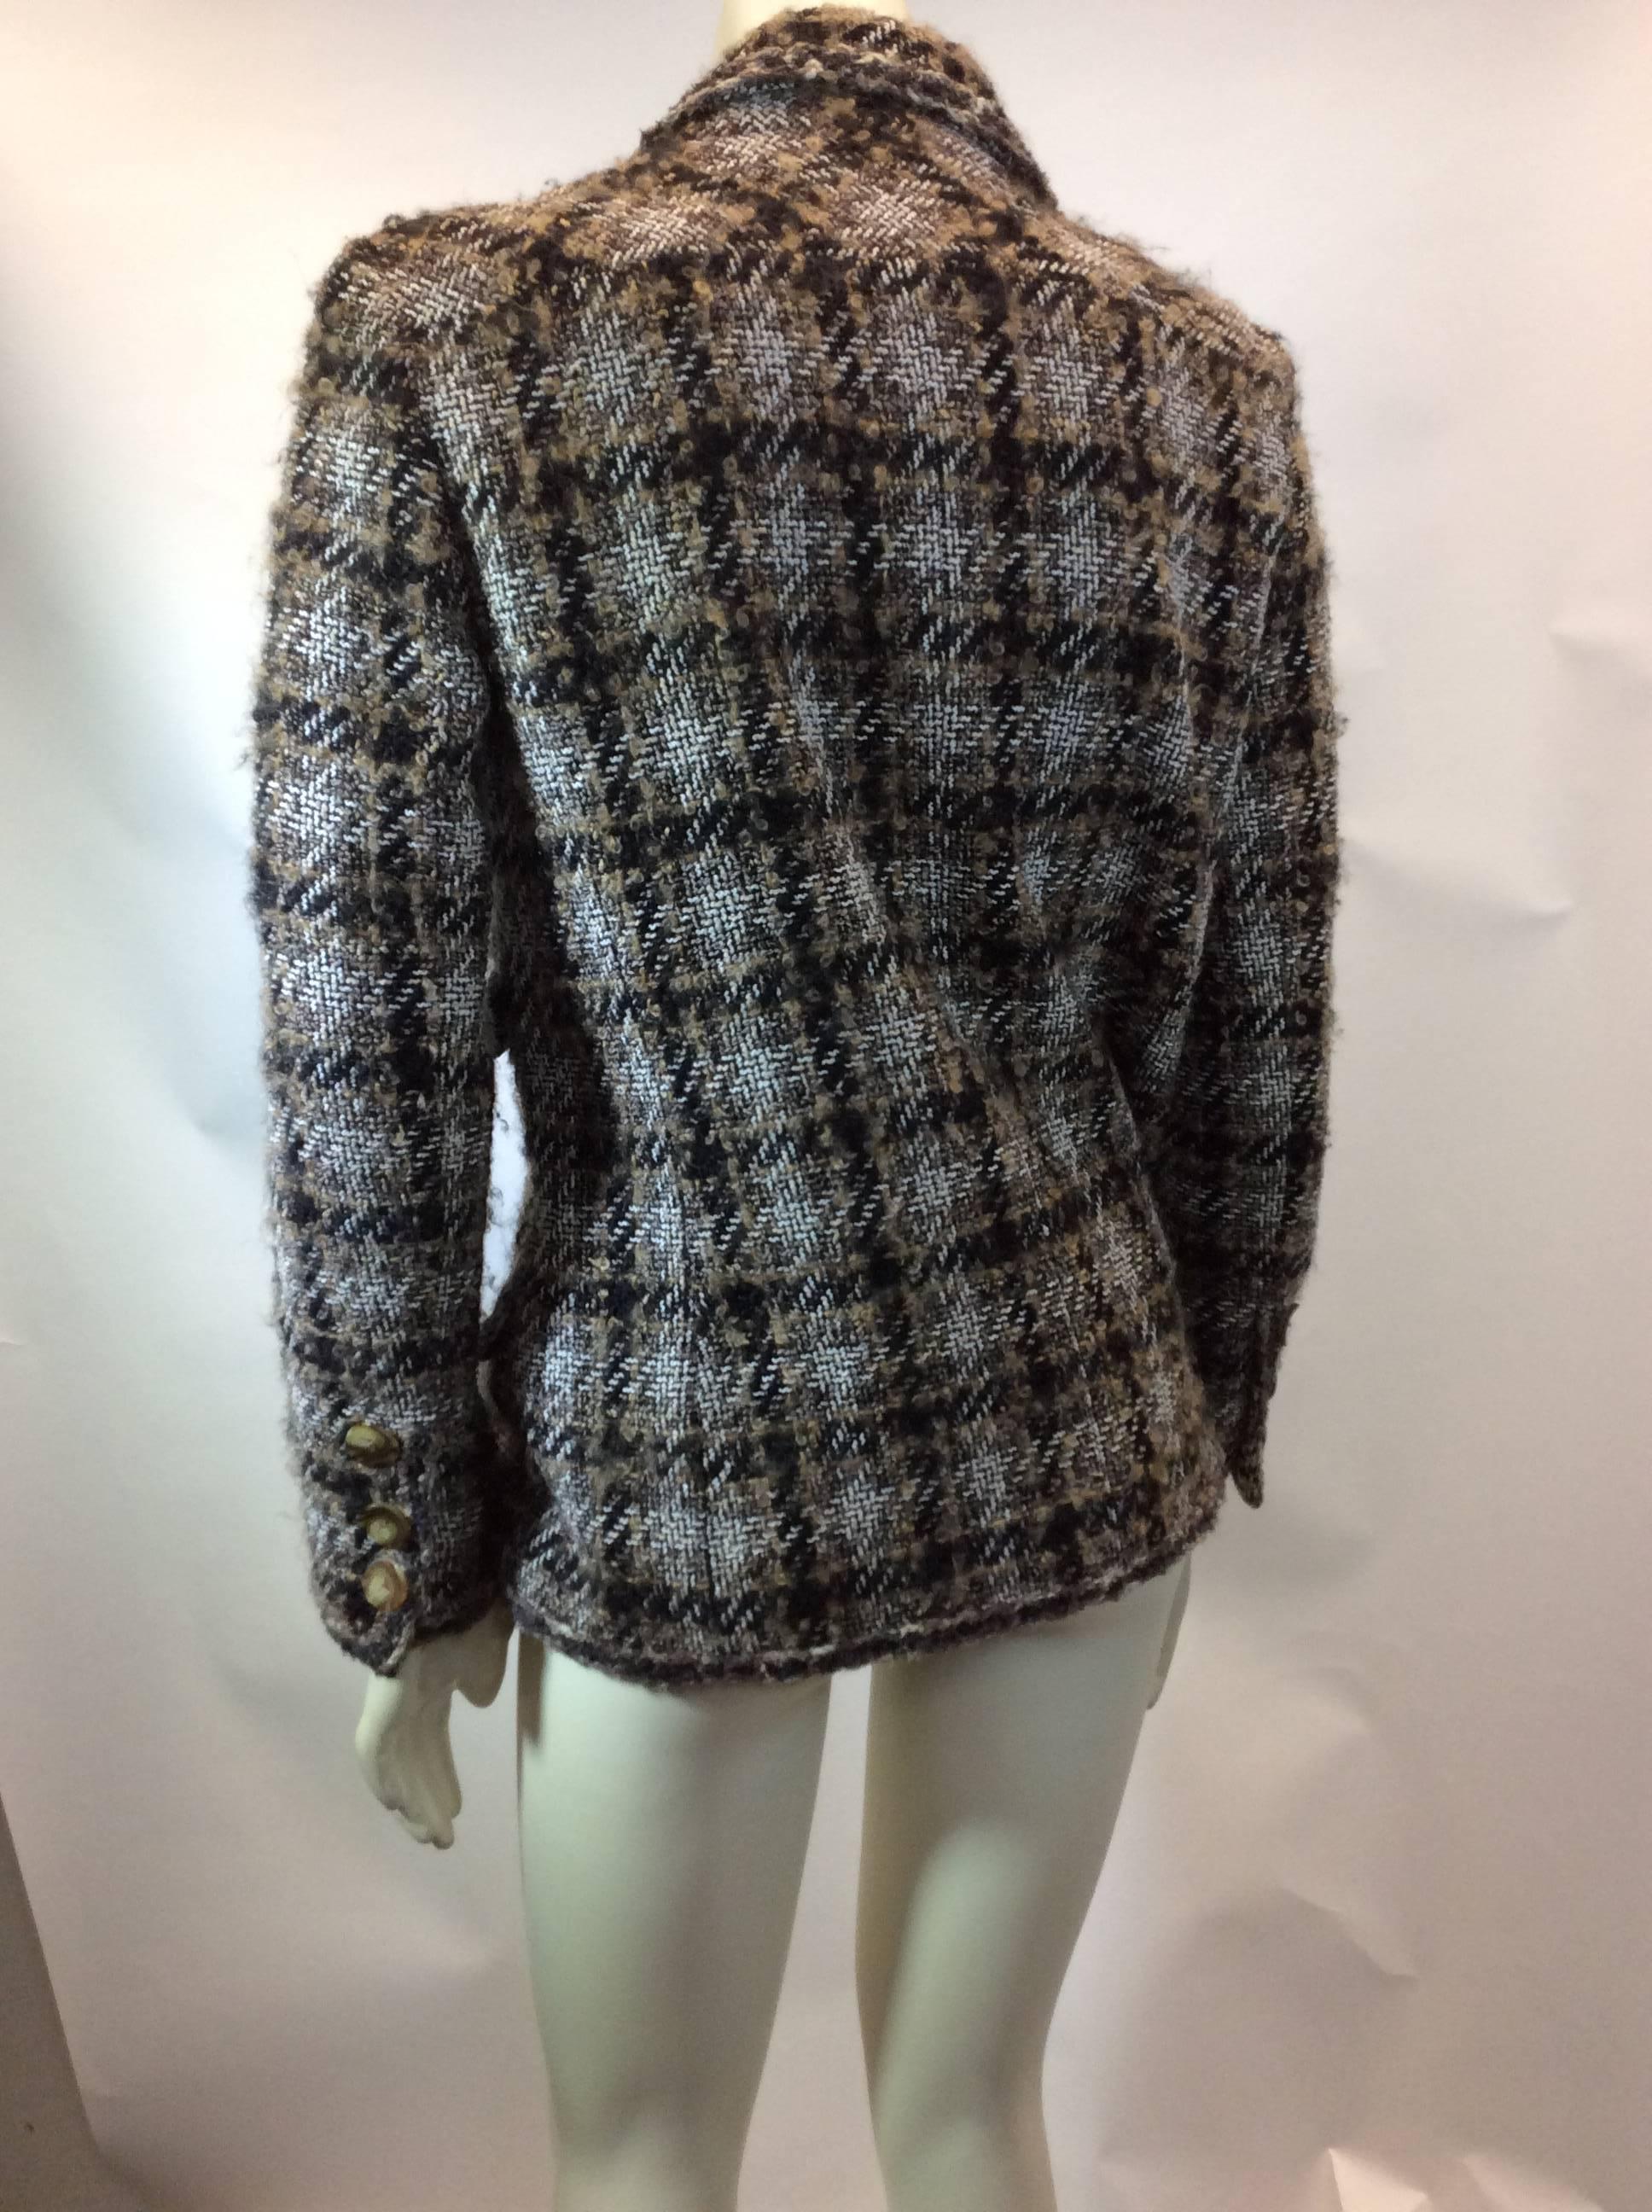 Chanel Brown Tweed Blazer In Excellent Condition For Sale In Narberth, PA